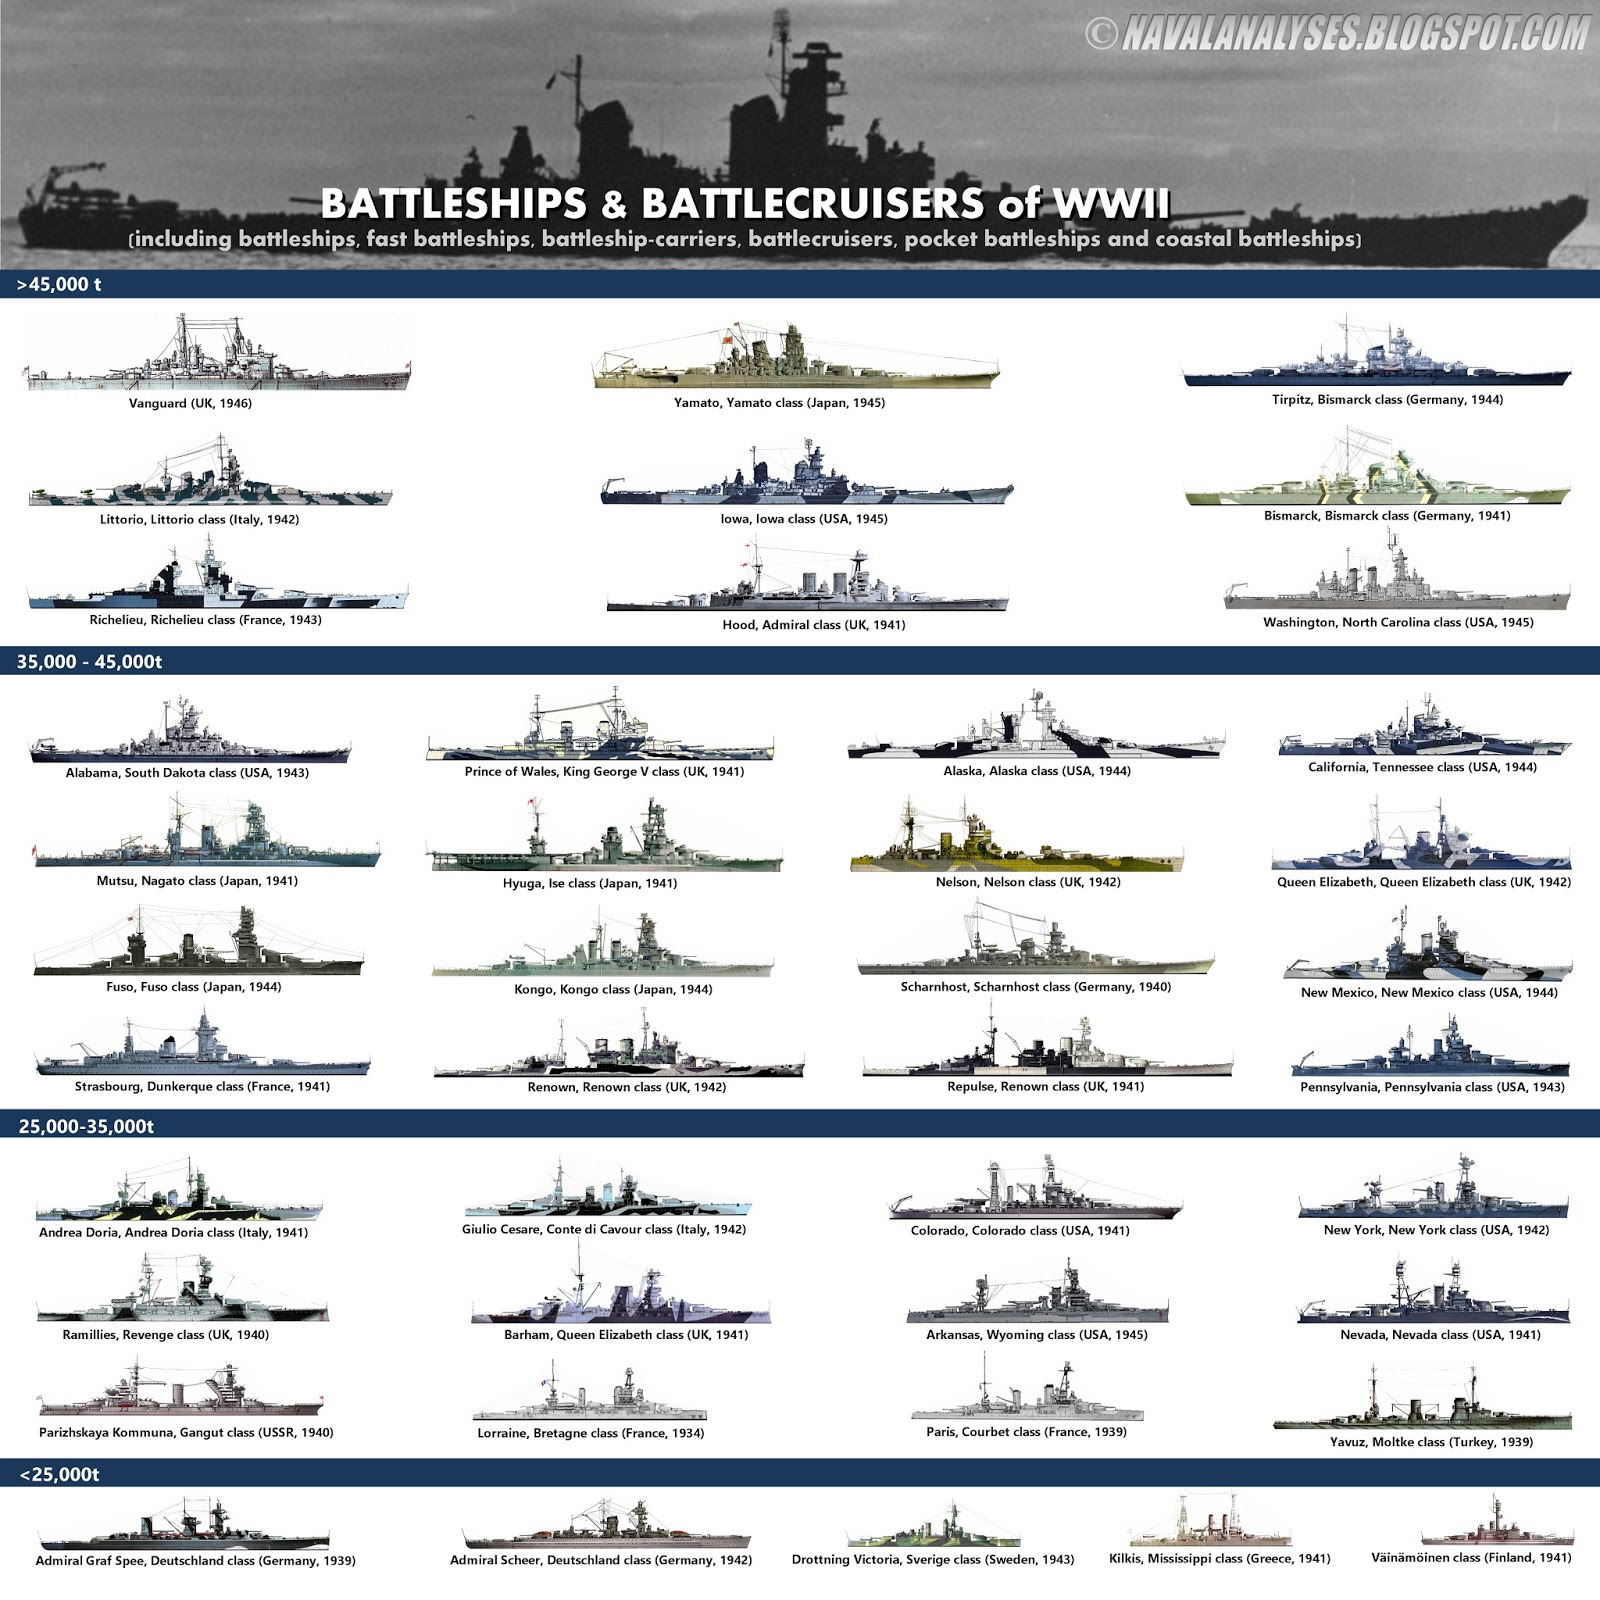 world of warships british destroyers guide